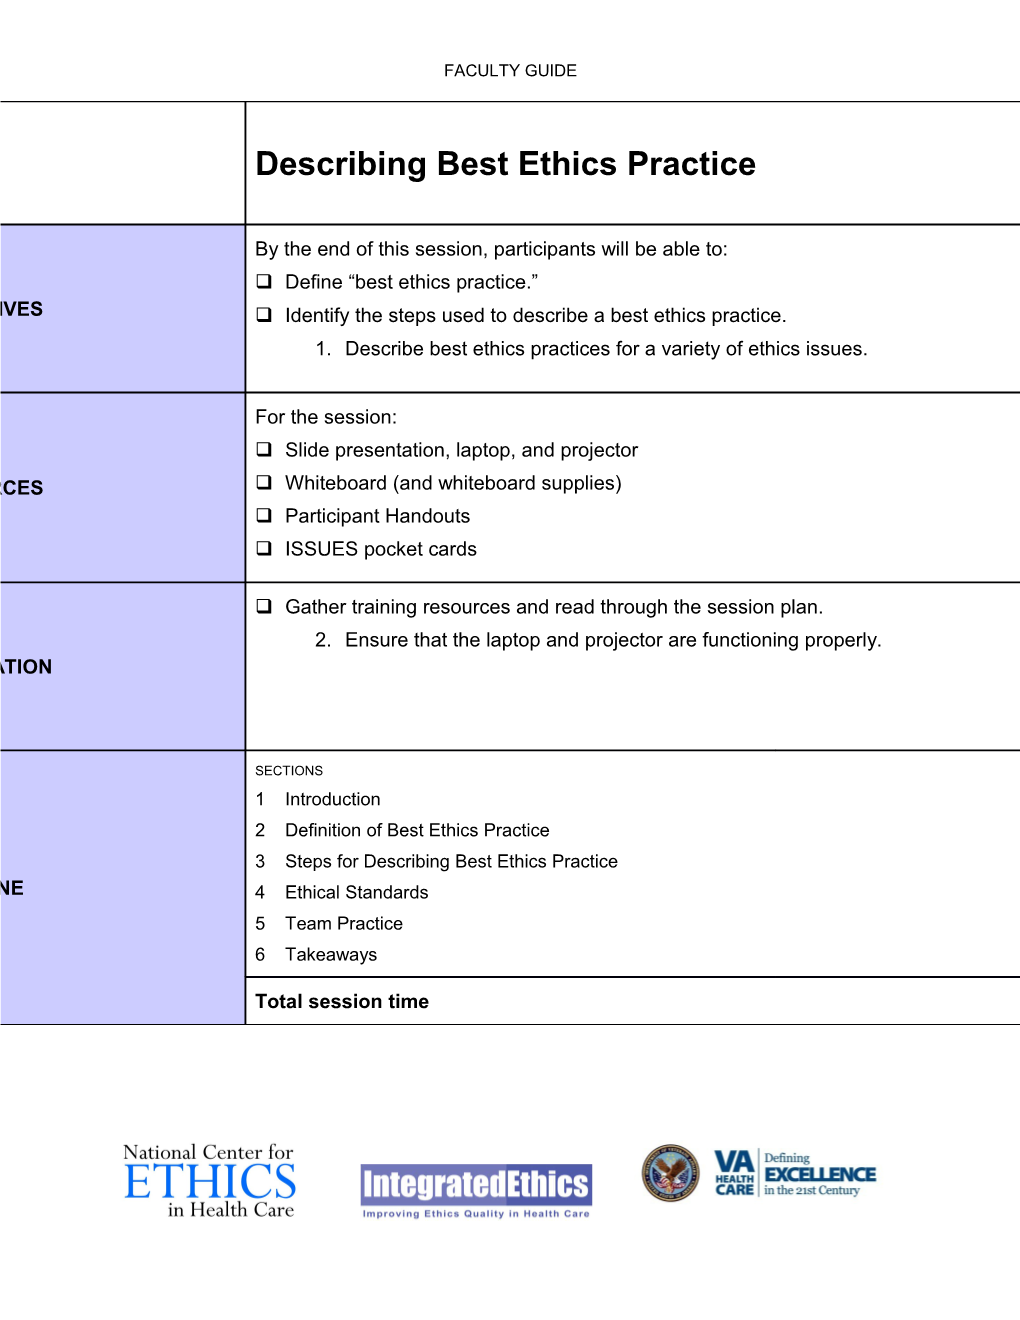 Preventive Ethics Beyond the Basics Module 3 - Faculty Guide - US Department of Veterans Affairs